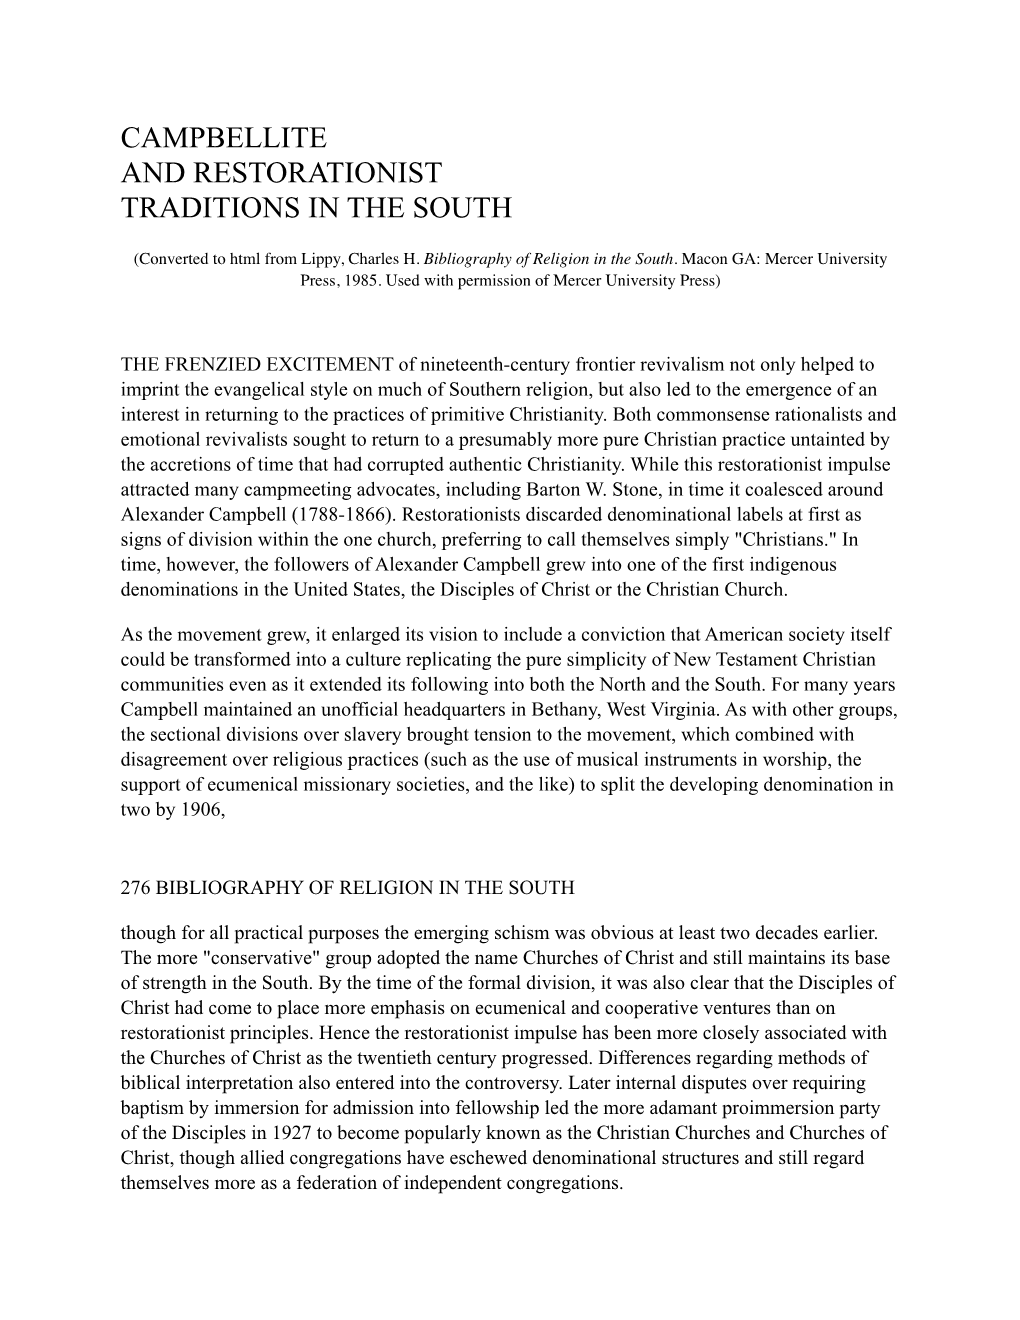 Campbellite and Restorationist Traditions in the South